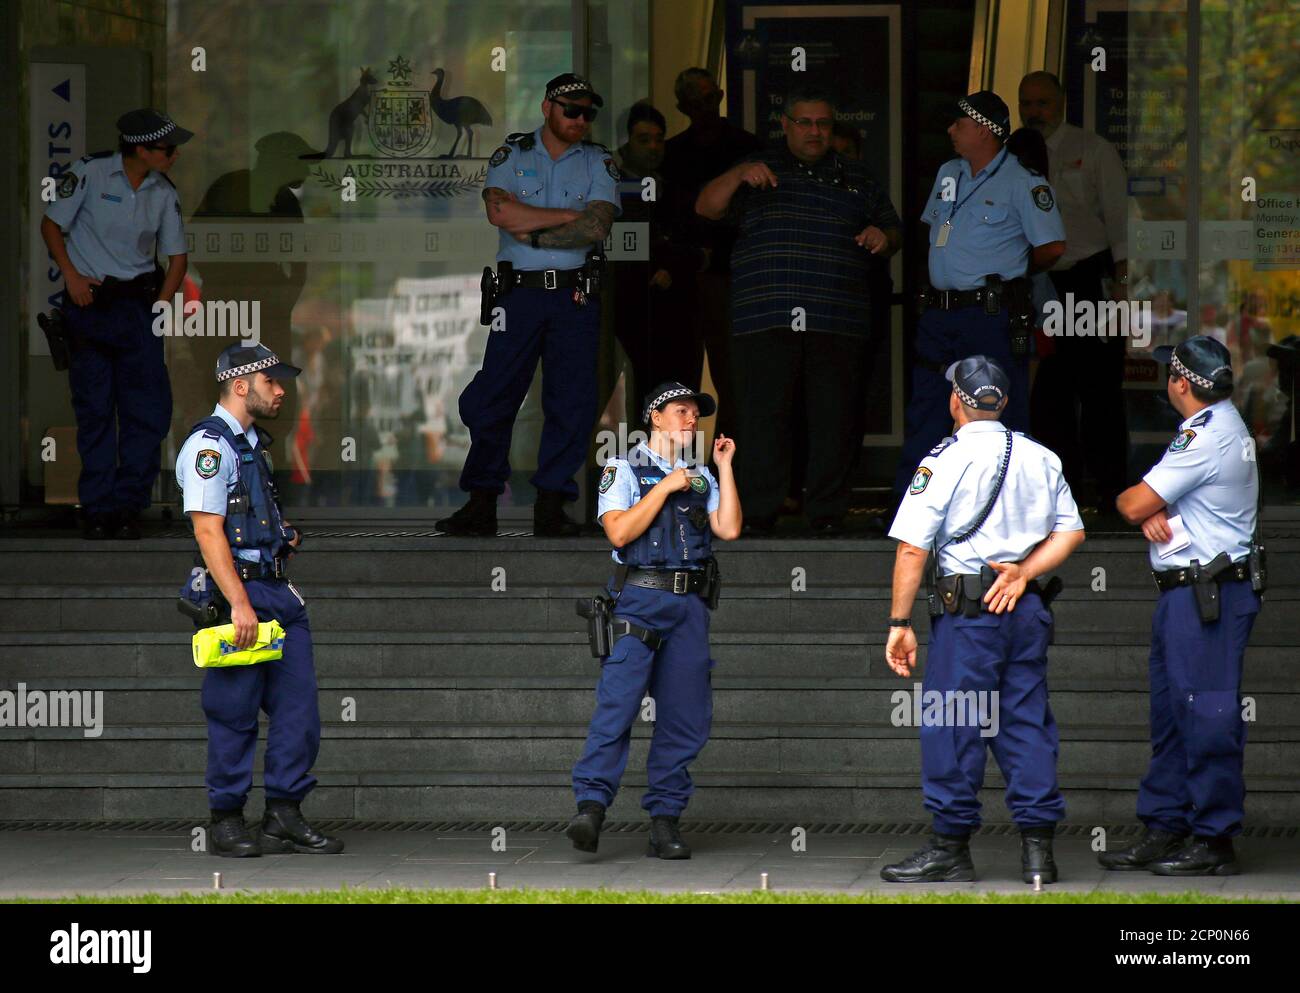 stand guard outside the offices of the Australian Government Department of Immigration and Border Protection as protesters from the Refugee Action Coalition hold a demonstration nearby in Sydney, Australia, April 29,